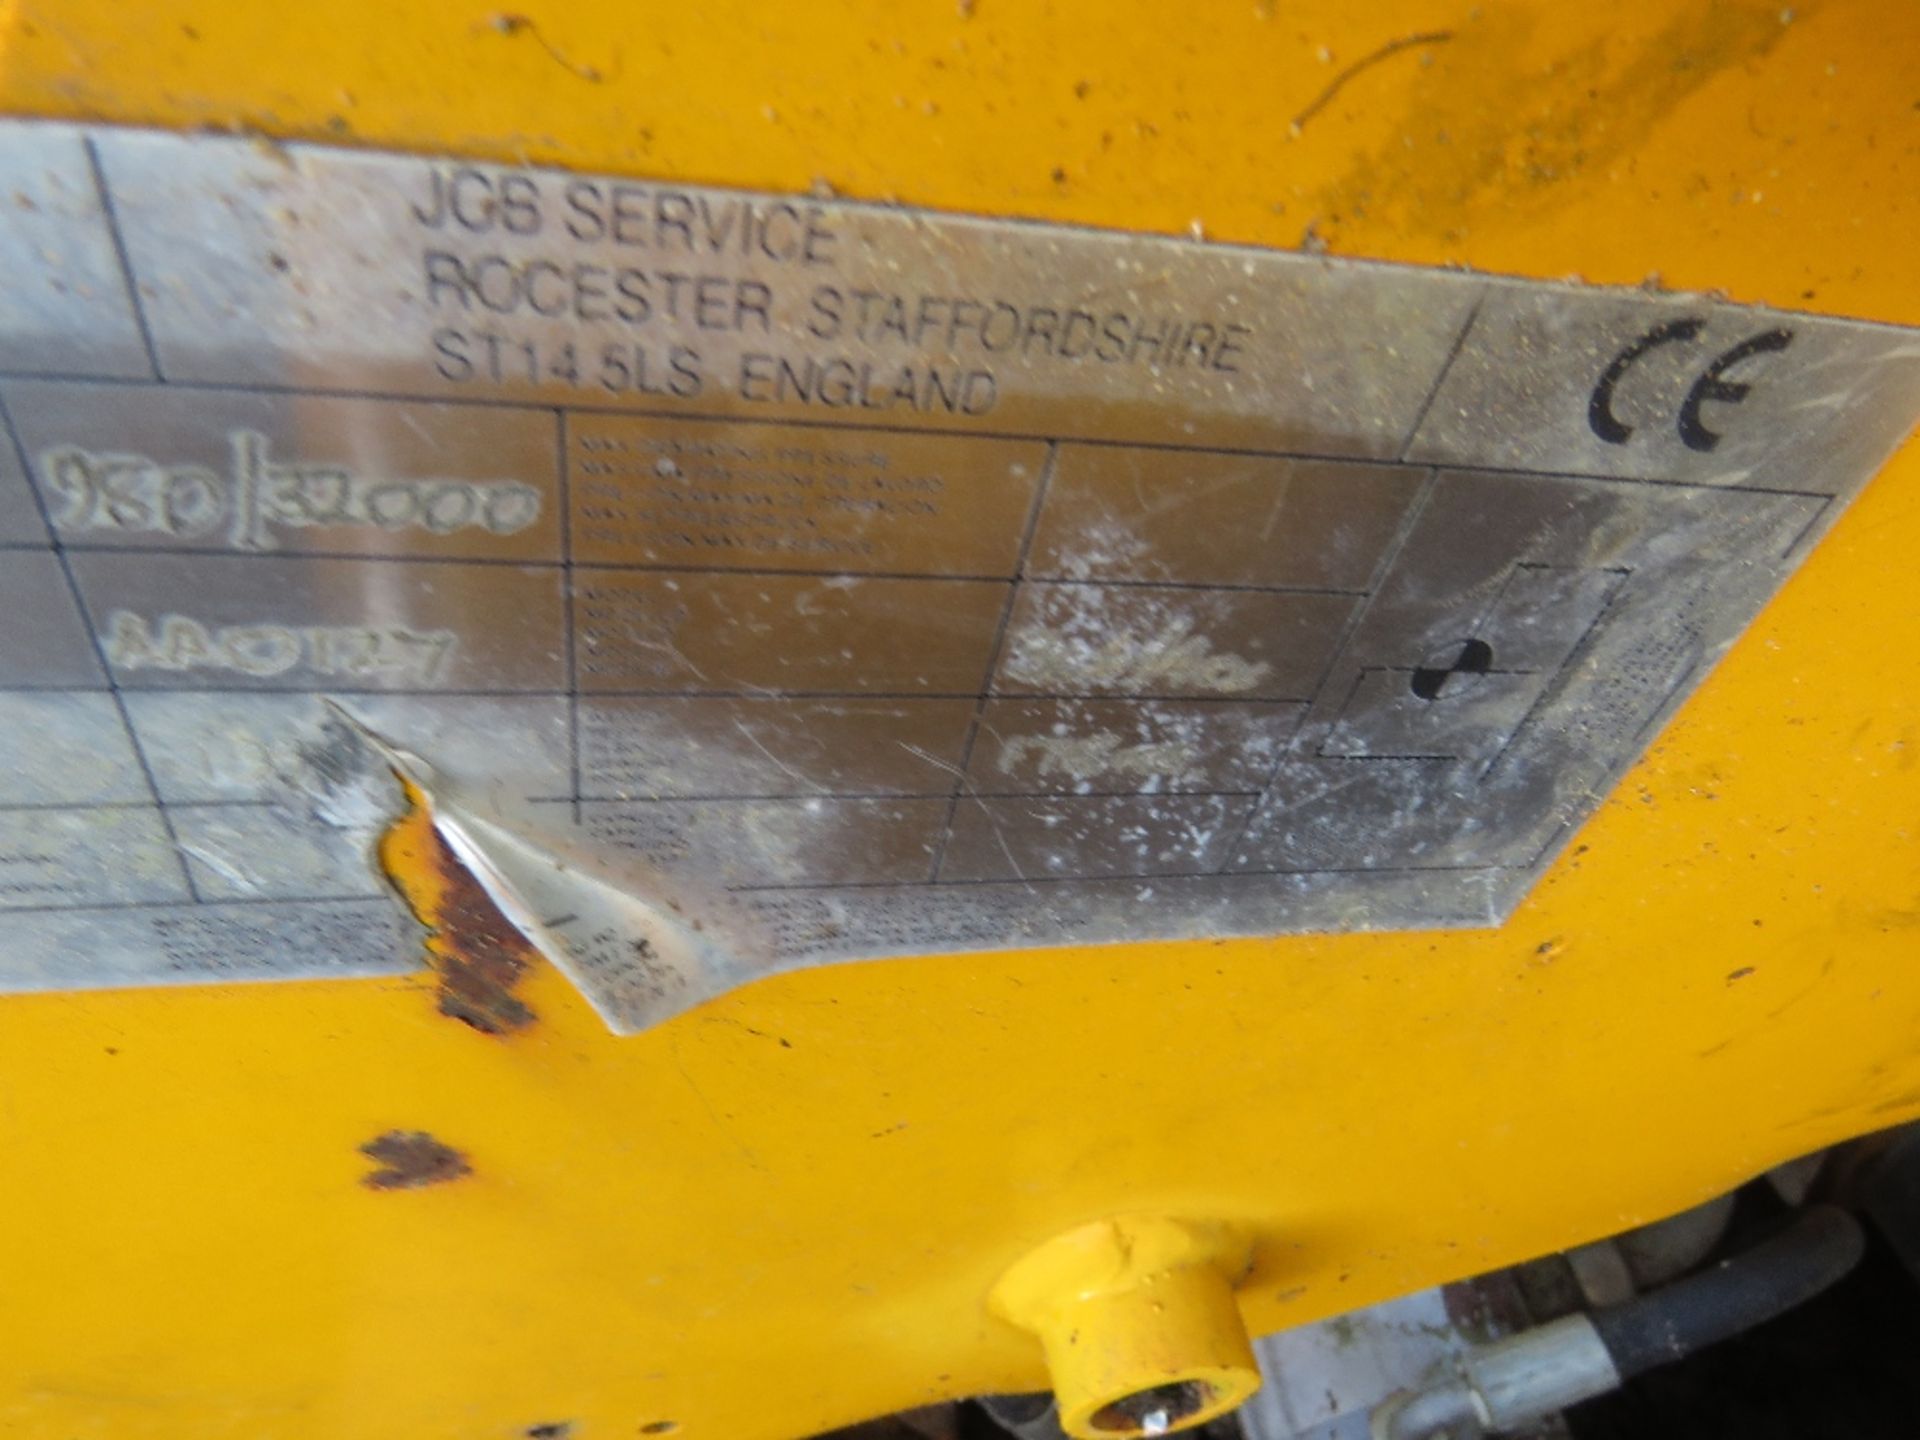 JCB 3CX/4CX EXCAVATOR MOUNTED COMPACTION PLATE HEAD 45MM PINS. DIRECT FROM LOCAL COMPANY AS PART OF - Image 3 of 4